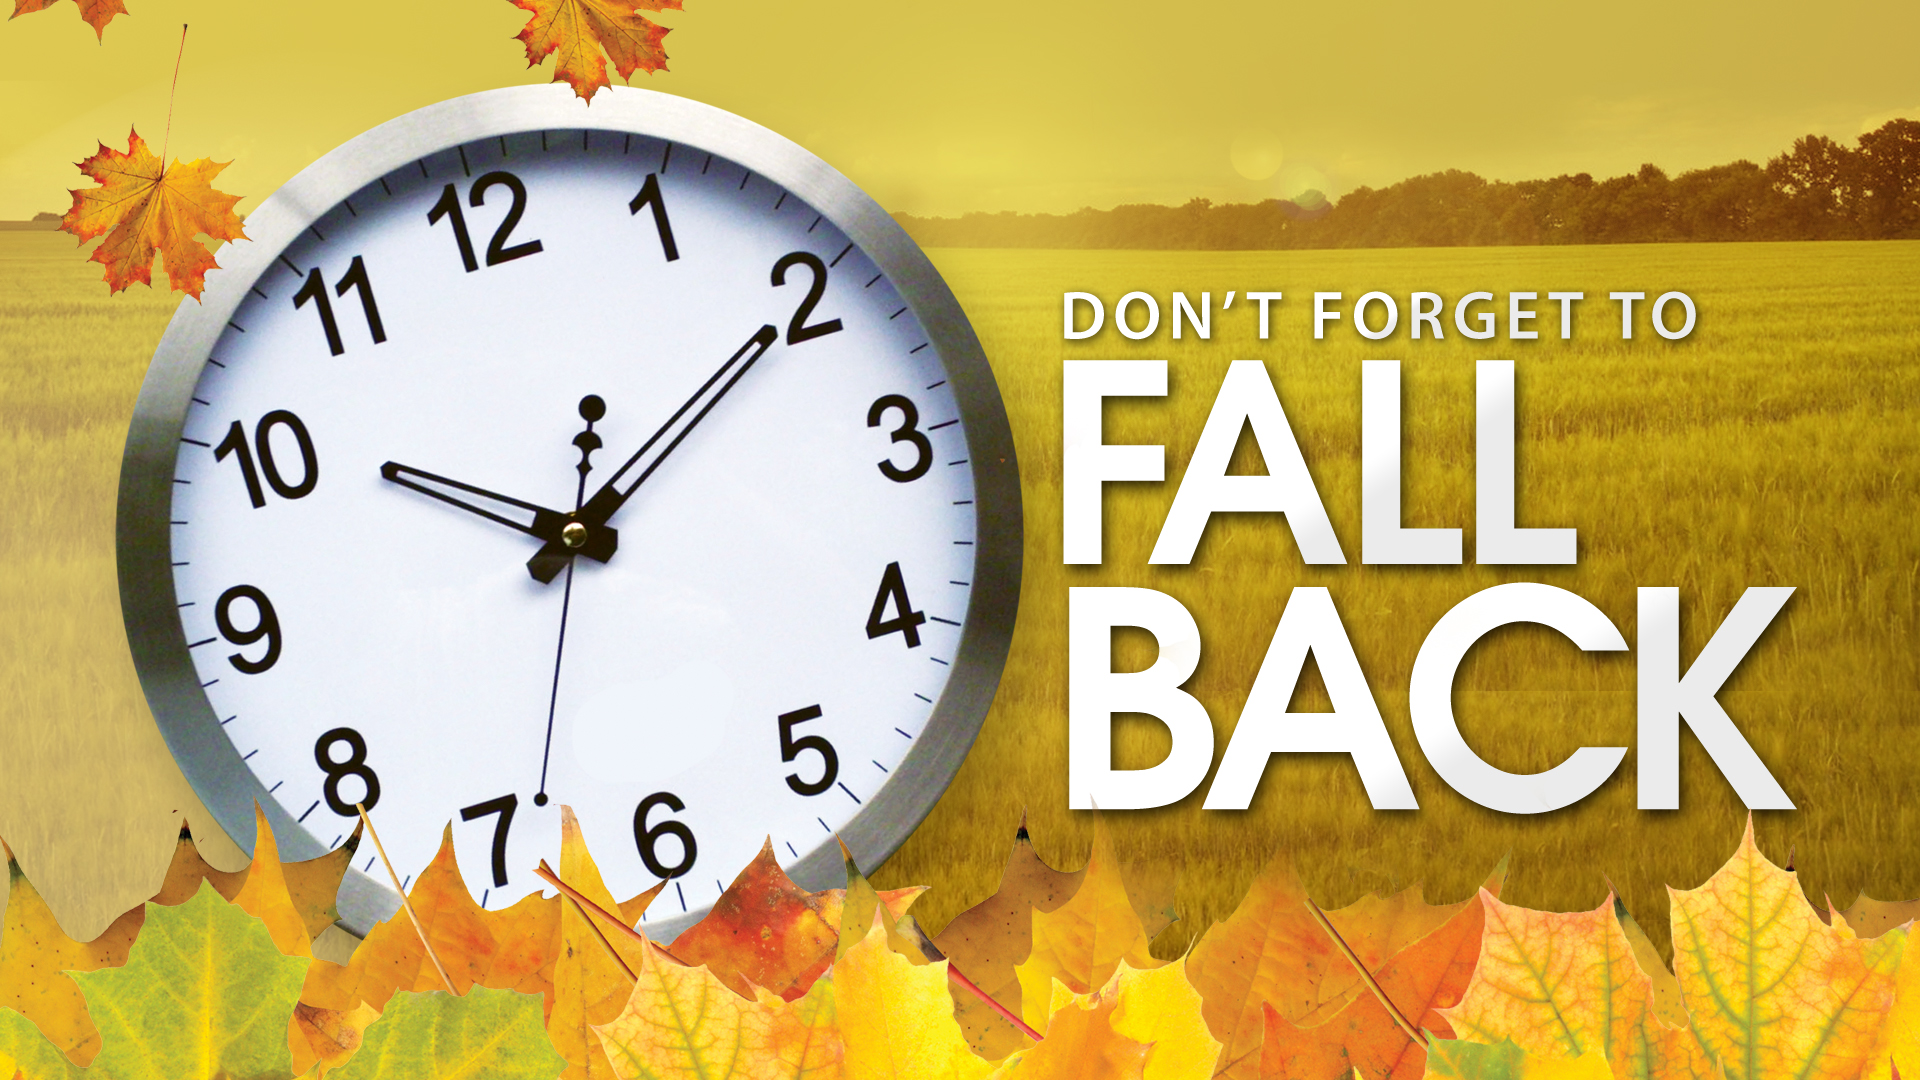 rossview-middle-school-post-daylights-saving-time-set-clocks-back-1-hour